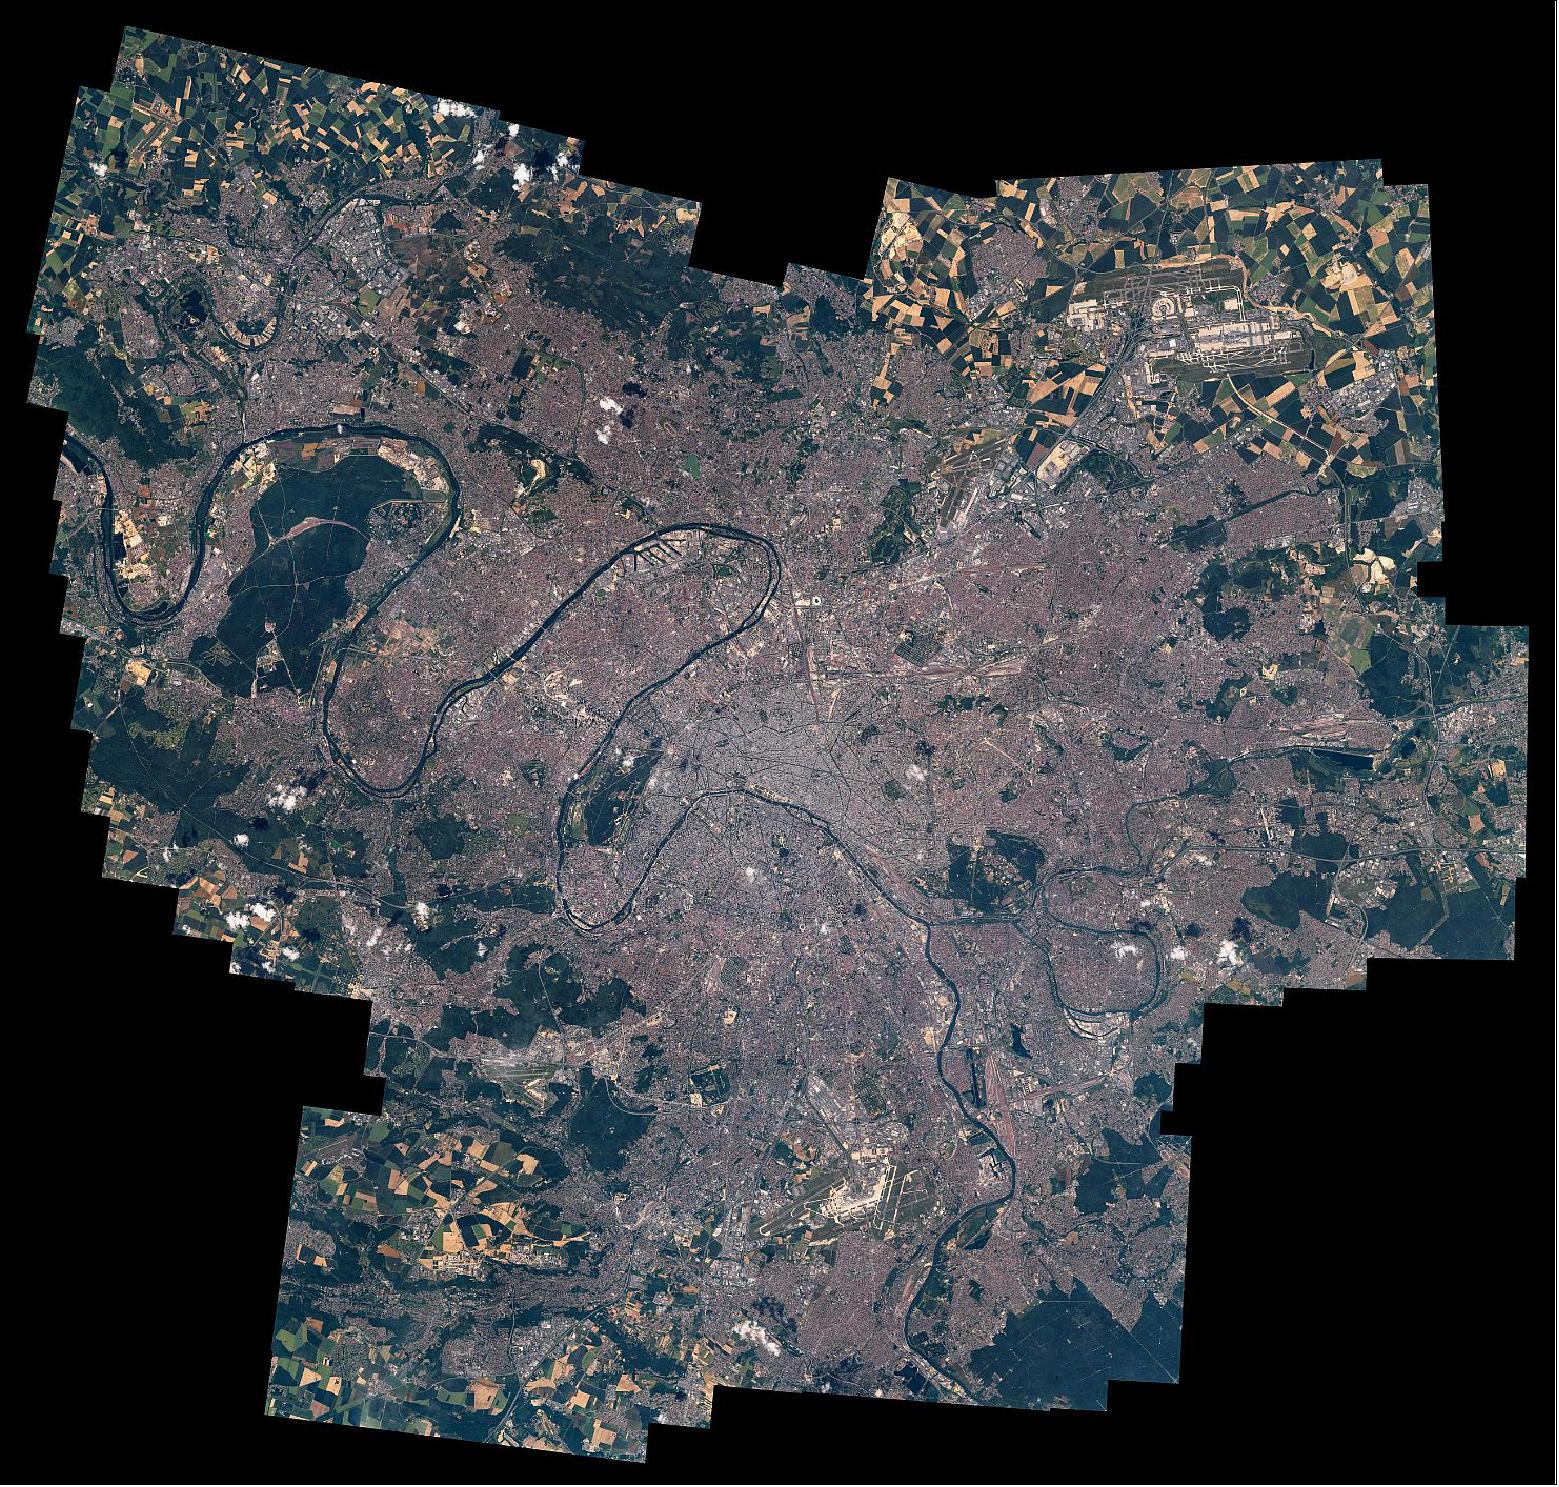 Figure 57: Paris as observed from the ISS by ESA astronaut Thomas Pesquet. Thomas asked to have the series of highly zoomed-in pictures aligned into this collage to show the area in detail (image credit: ESA/NASA–T. Pesquet/W. Harold)